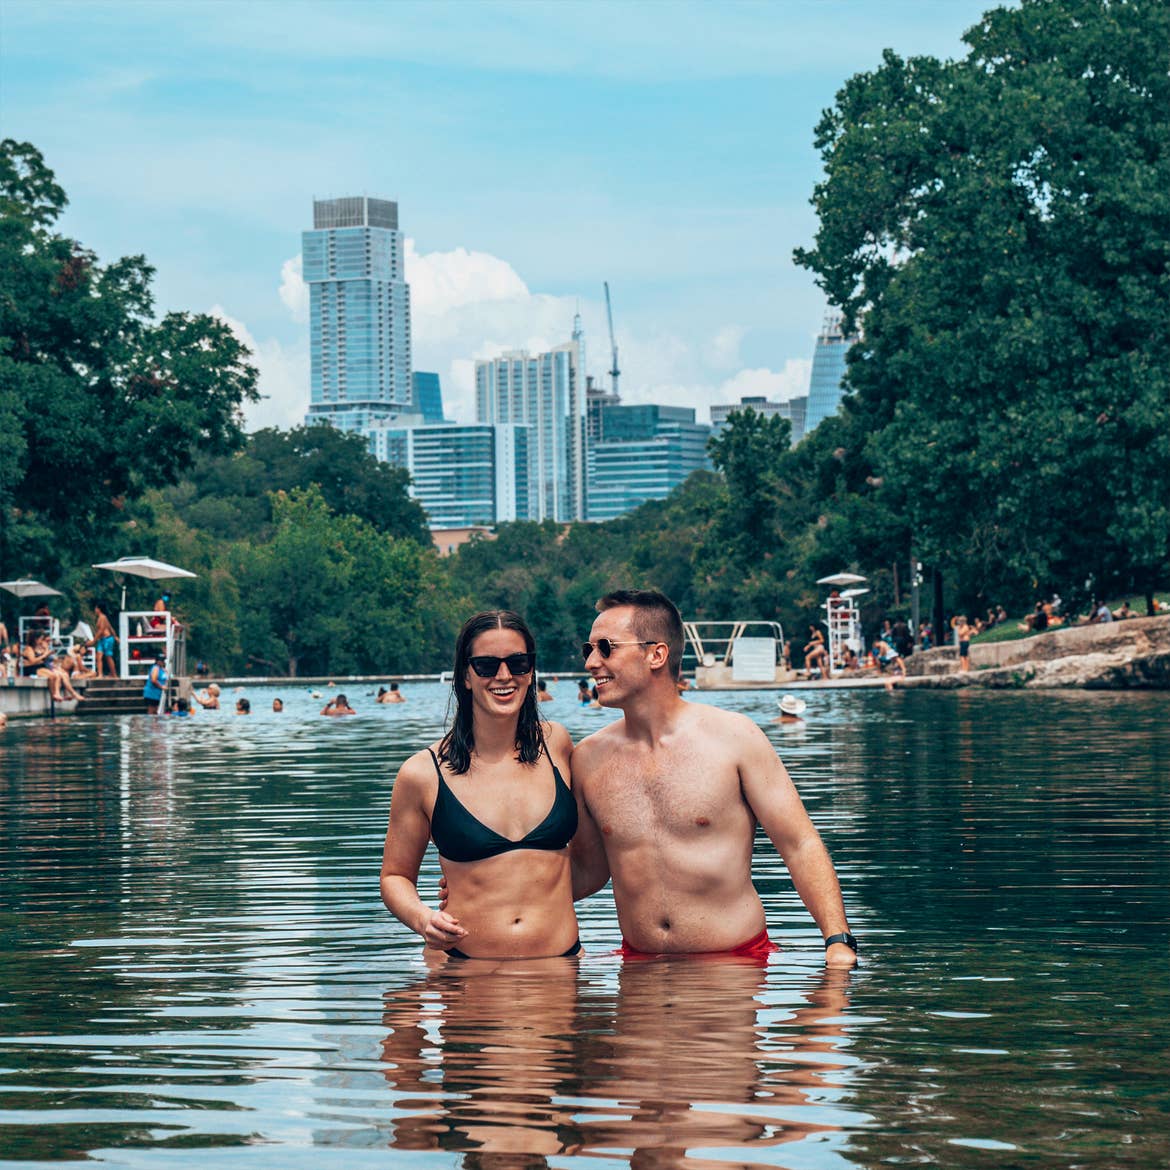 A woman in a black swimsuit and sunglasses stands with a man in swim trunks in the water as a skyline appears in the background.